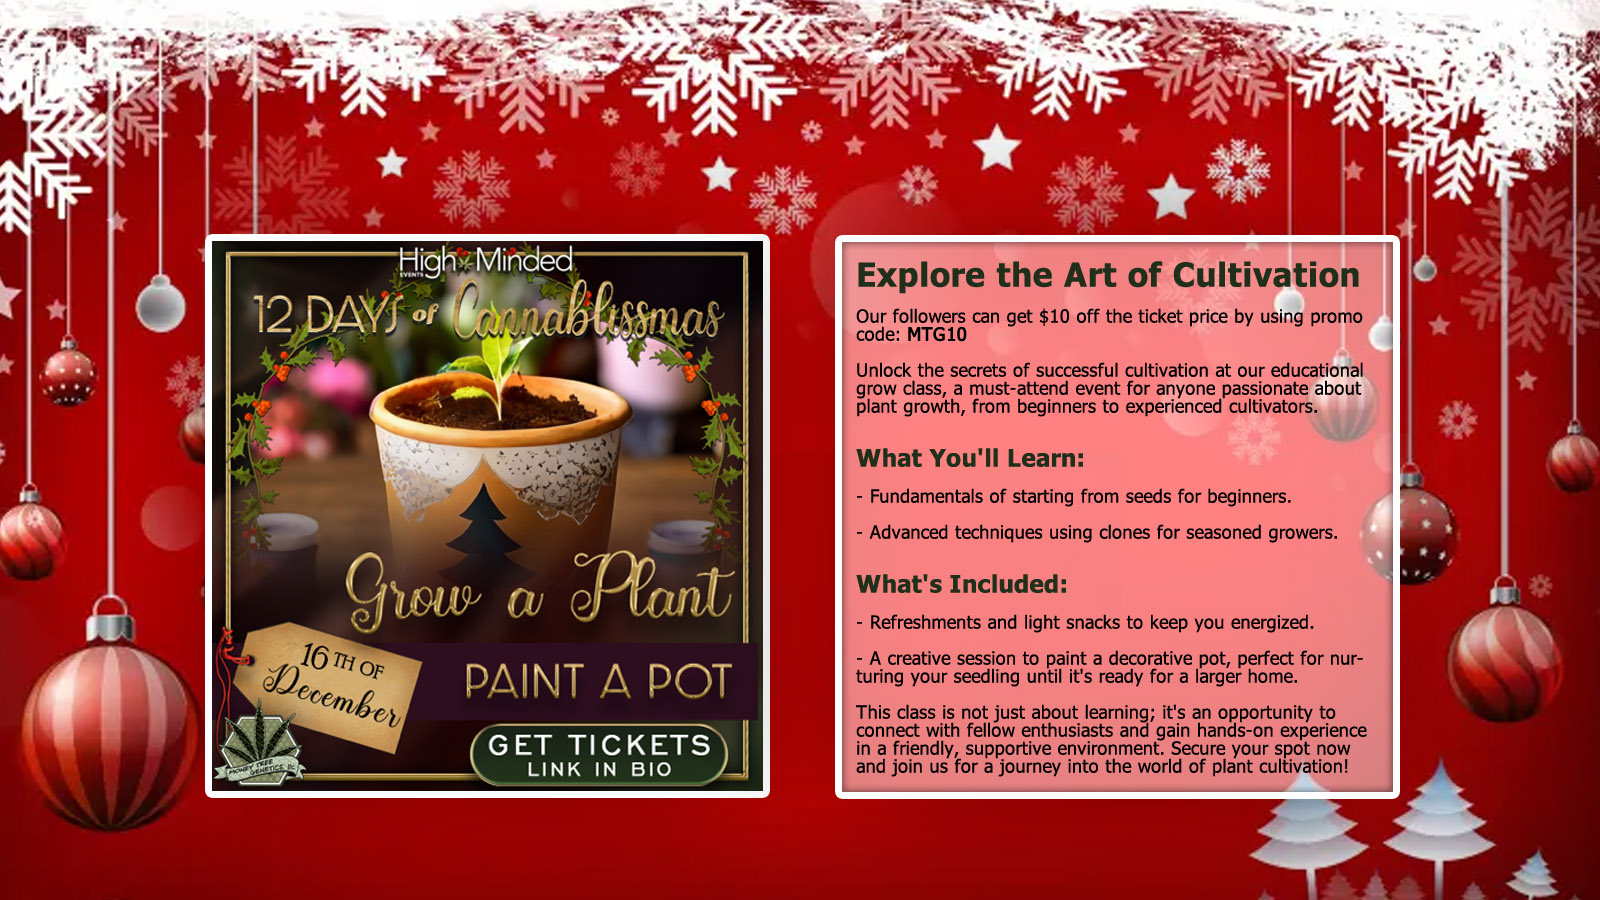 You are currently viewing Explore the Art of Cultivation: Educational Grow Class